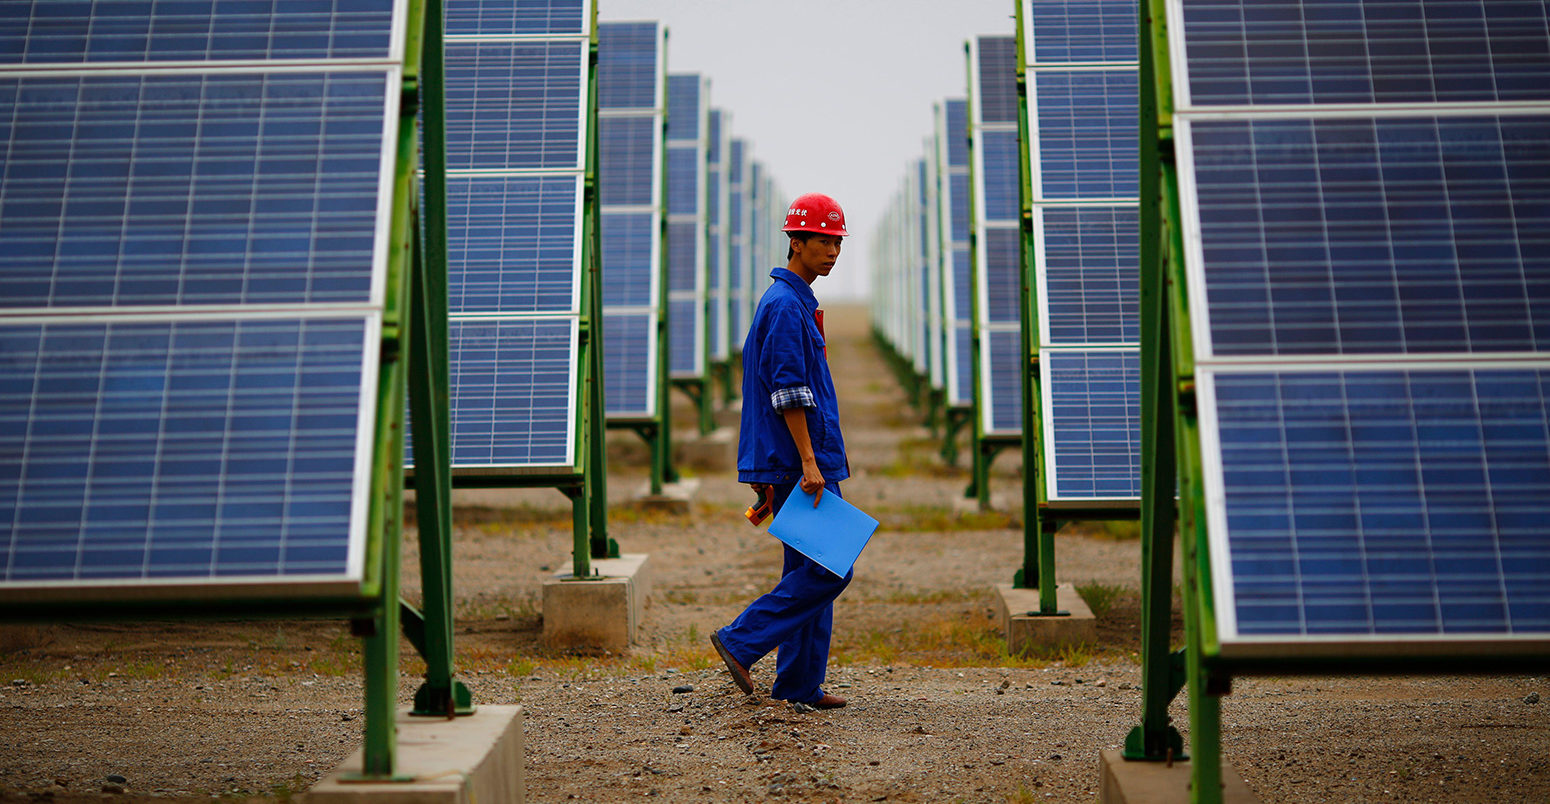 A worker inspects solar panels at a solar farm in Dunhuang